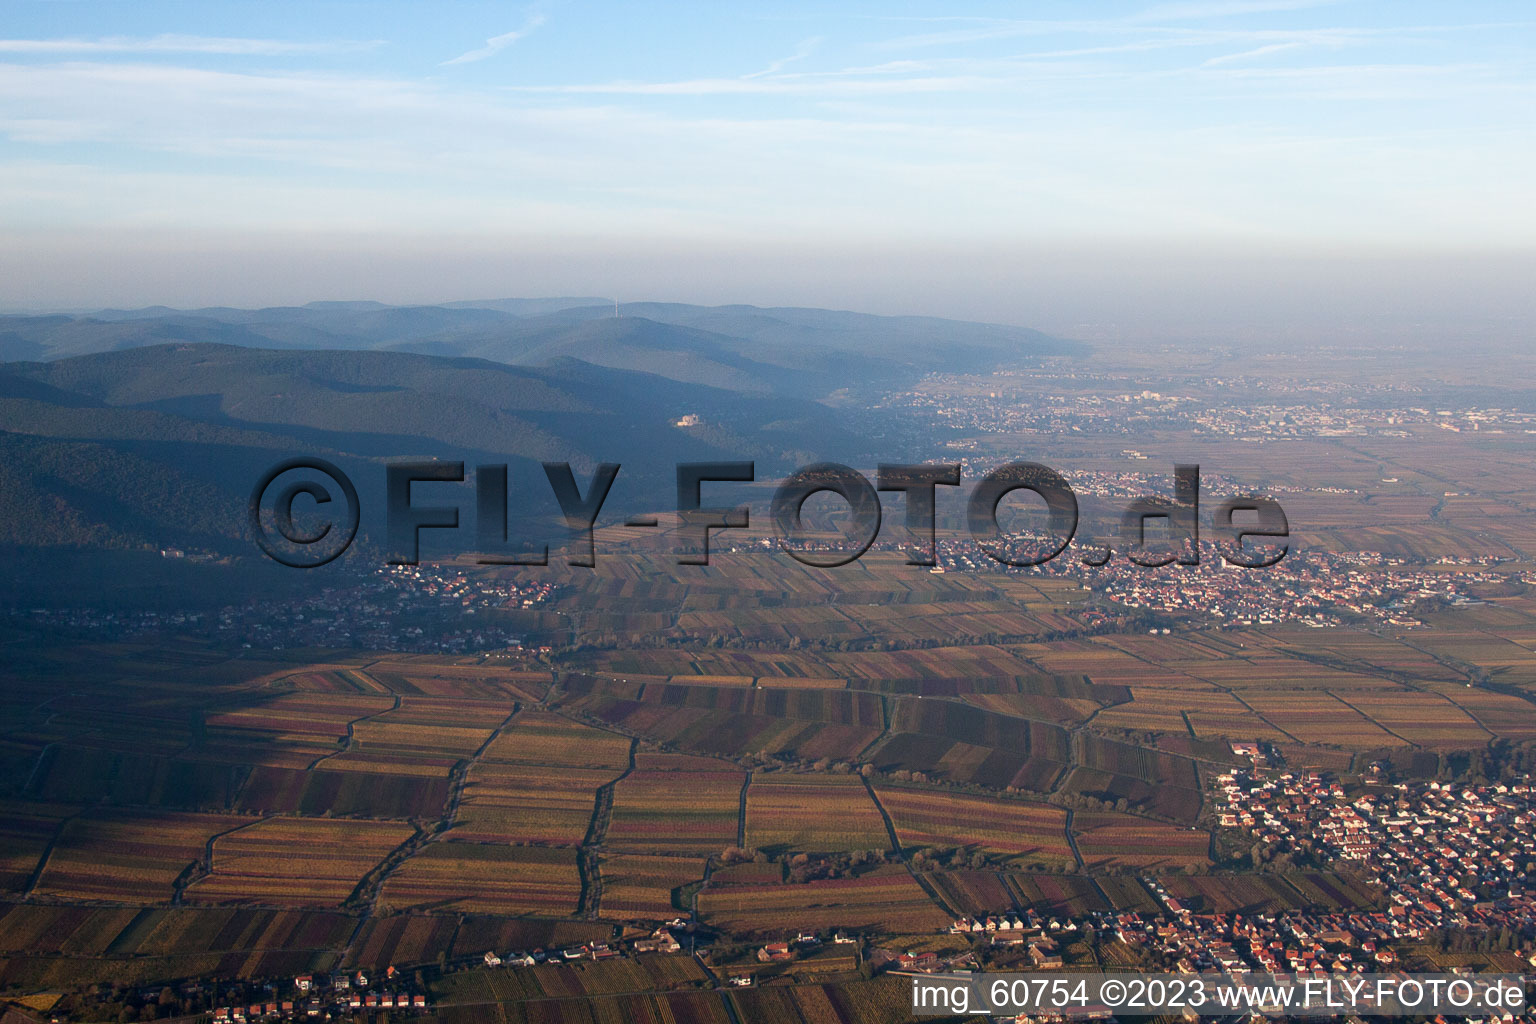 Edenkoben in the state Rhineland-Palatinate, Germany seen from above